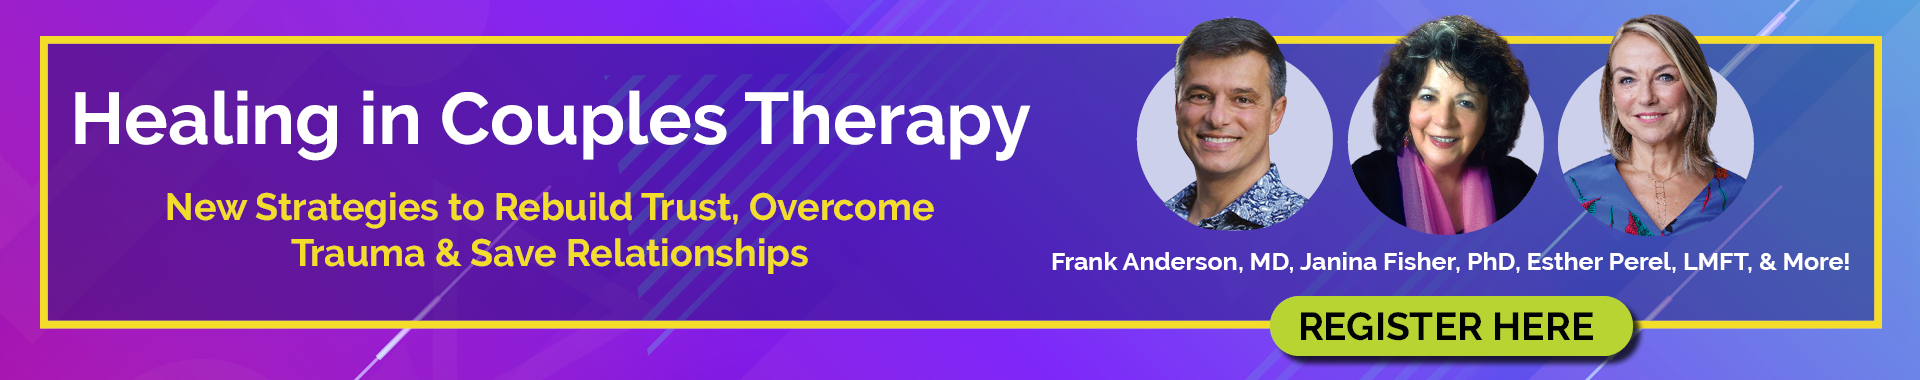 Healing in Couples Therapy